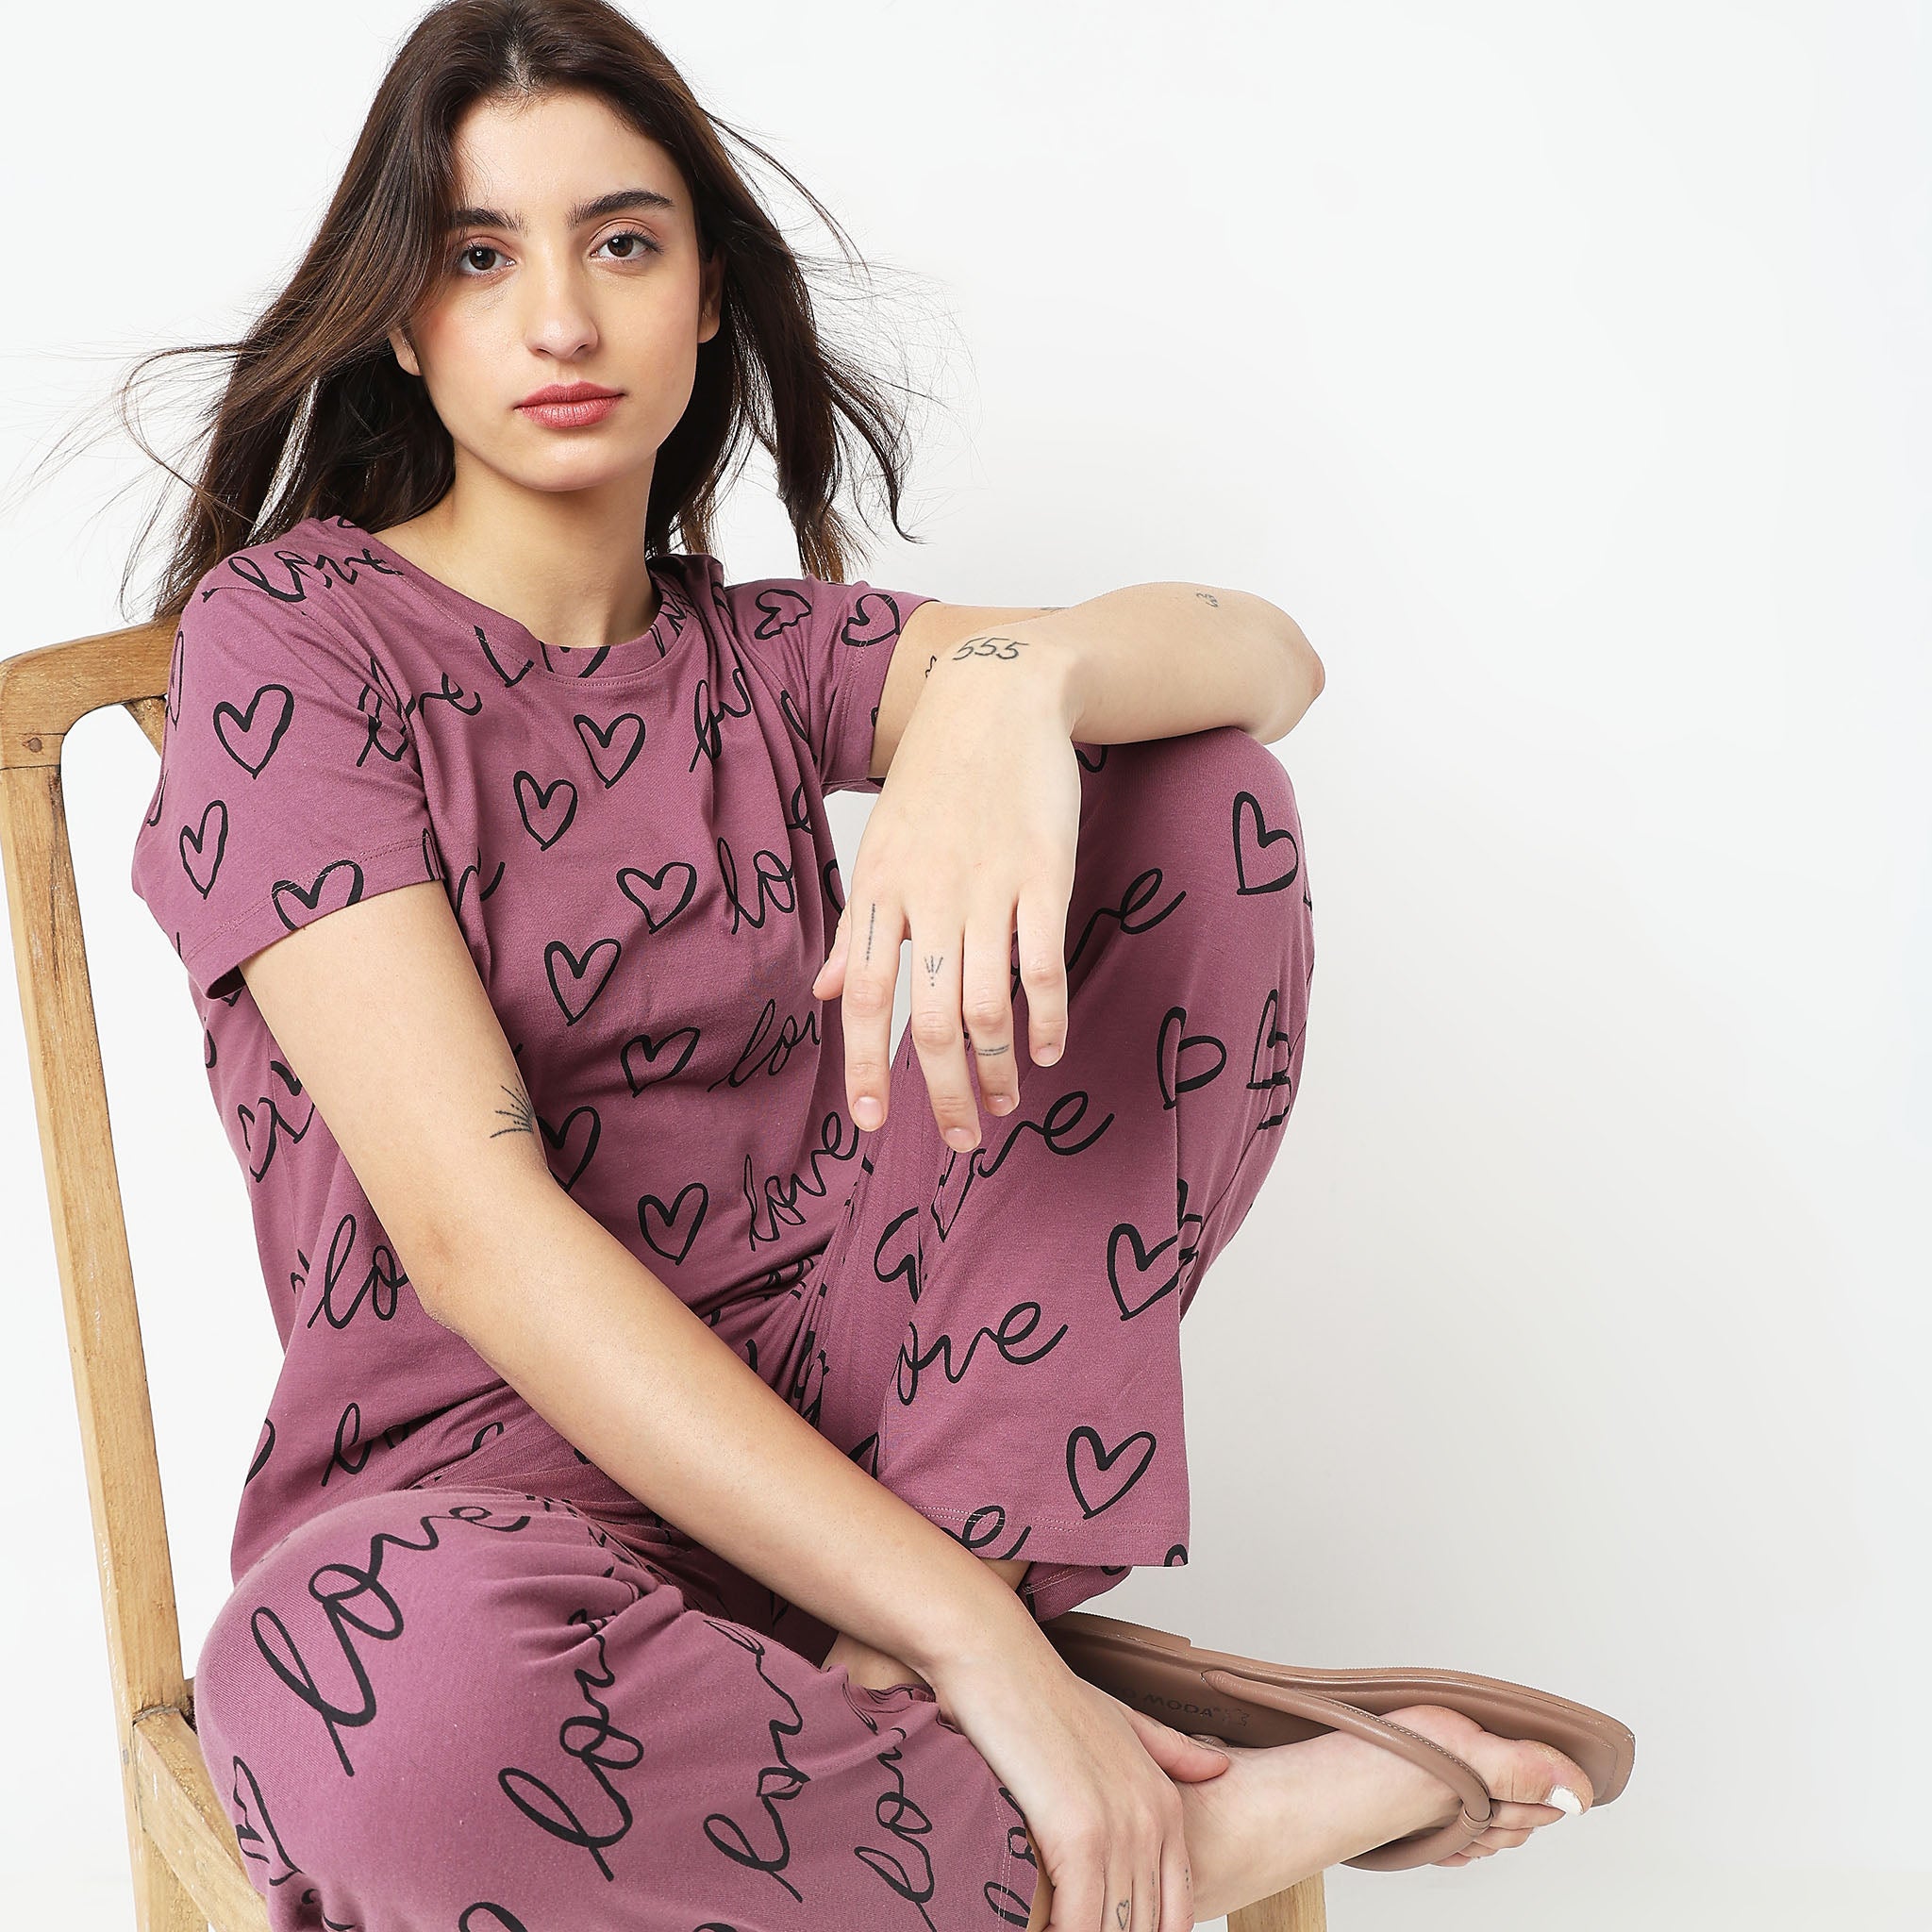 Nightwear for Women | Nighties, Night Suits & Gowns - Private Lives